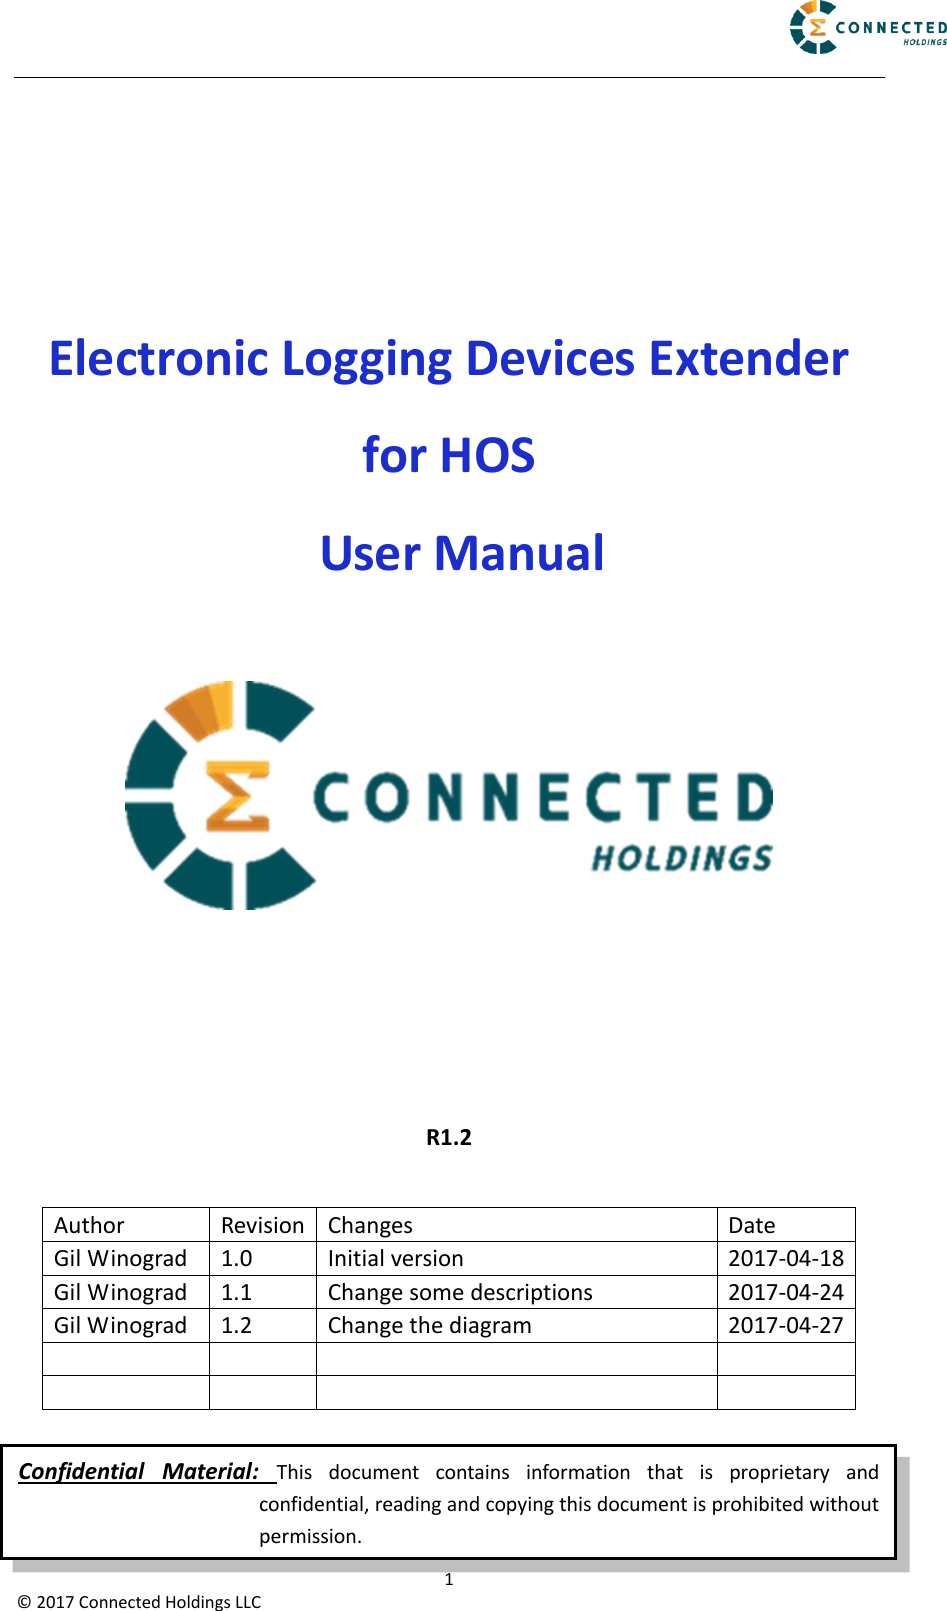                                                                                                          1 ©  2017 Connected Holdings LLC   Electronic Logging Devices Extender for HOS   User Manual        R1.2  Contents Author Revision Changes Date Gil Winograd 1.0 Initial version 2017-04-18 Gil Winograd 1.1 Change some descriptions 2017-04-24 Gil Winograd 1.2 Change the diagram 2017-04-27         Confidential  Material:  This  document  contains  information  that  is  proprietary  and confidential, reading and copying this document is prohibited without permission. 